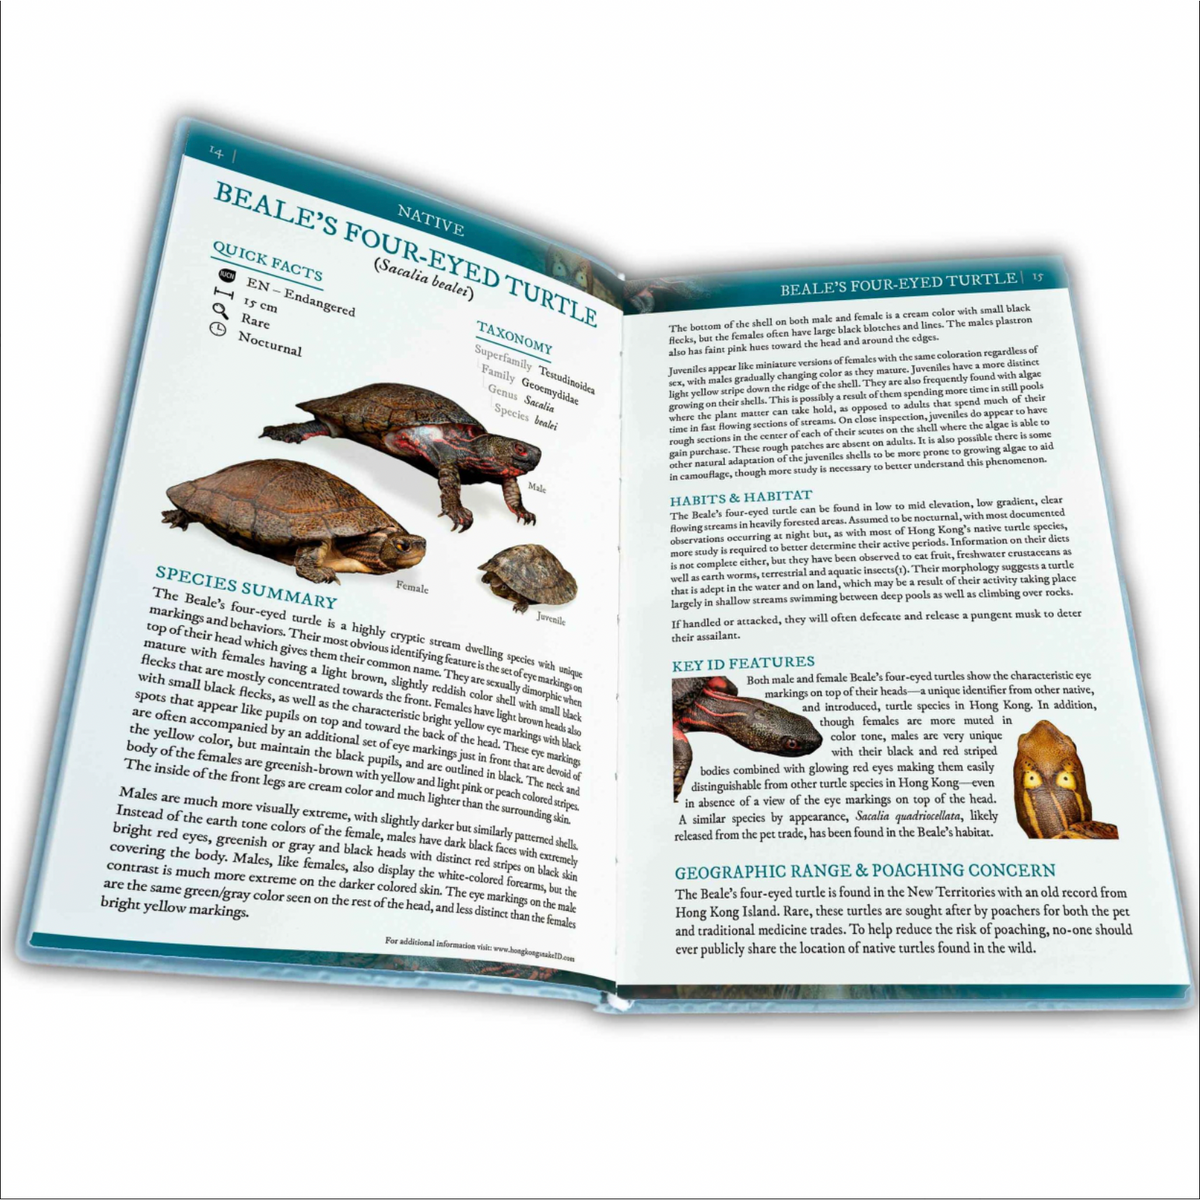 BOOK: Field Guide to the Turtles of Hong Kong